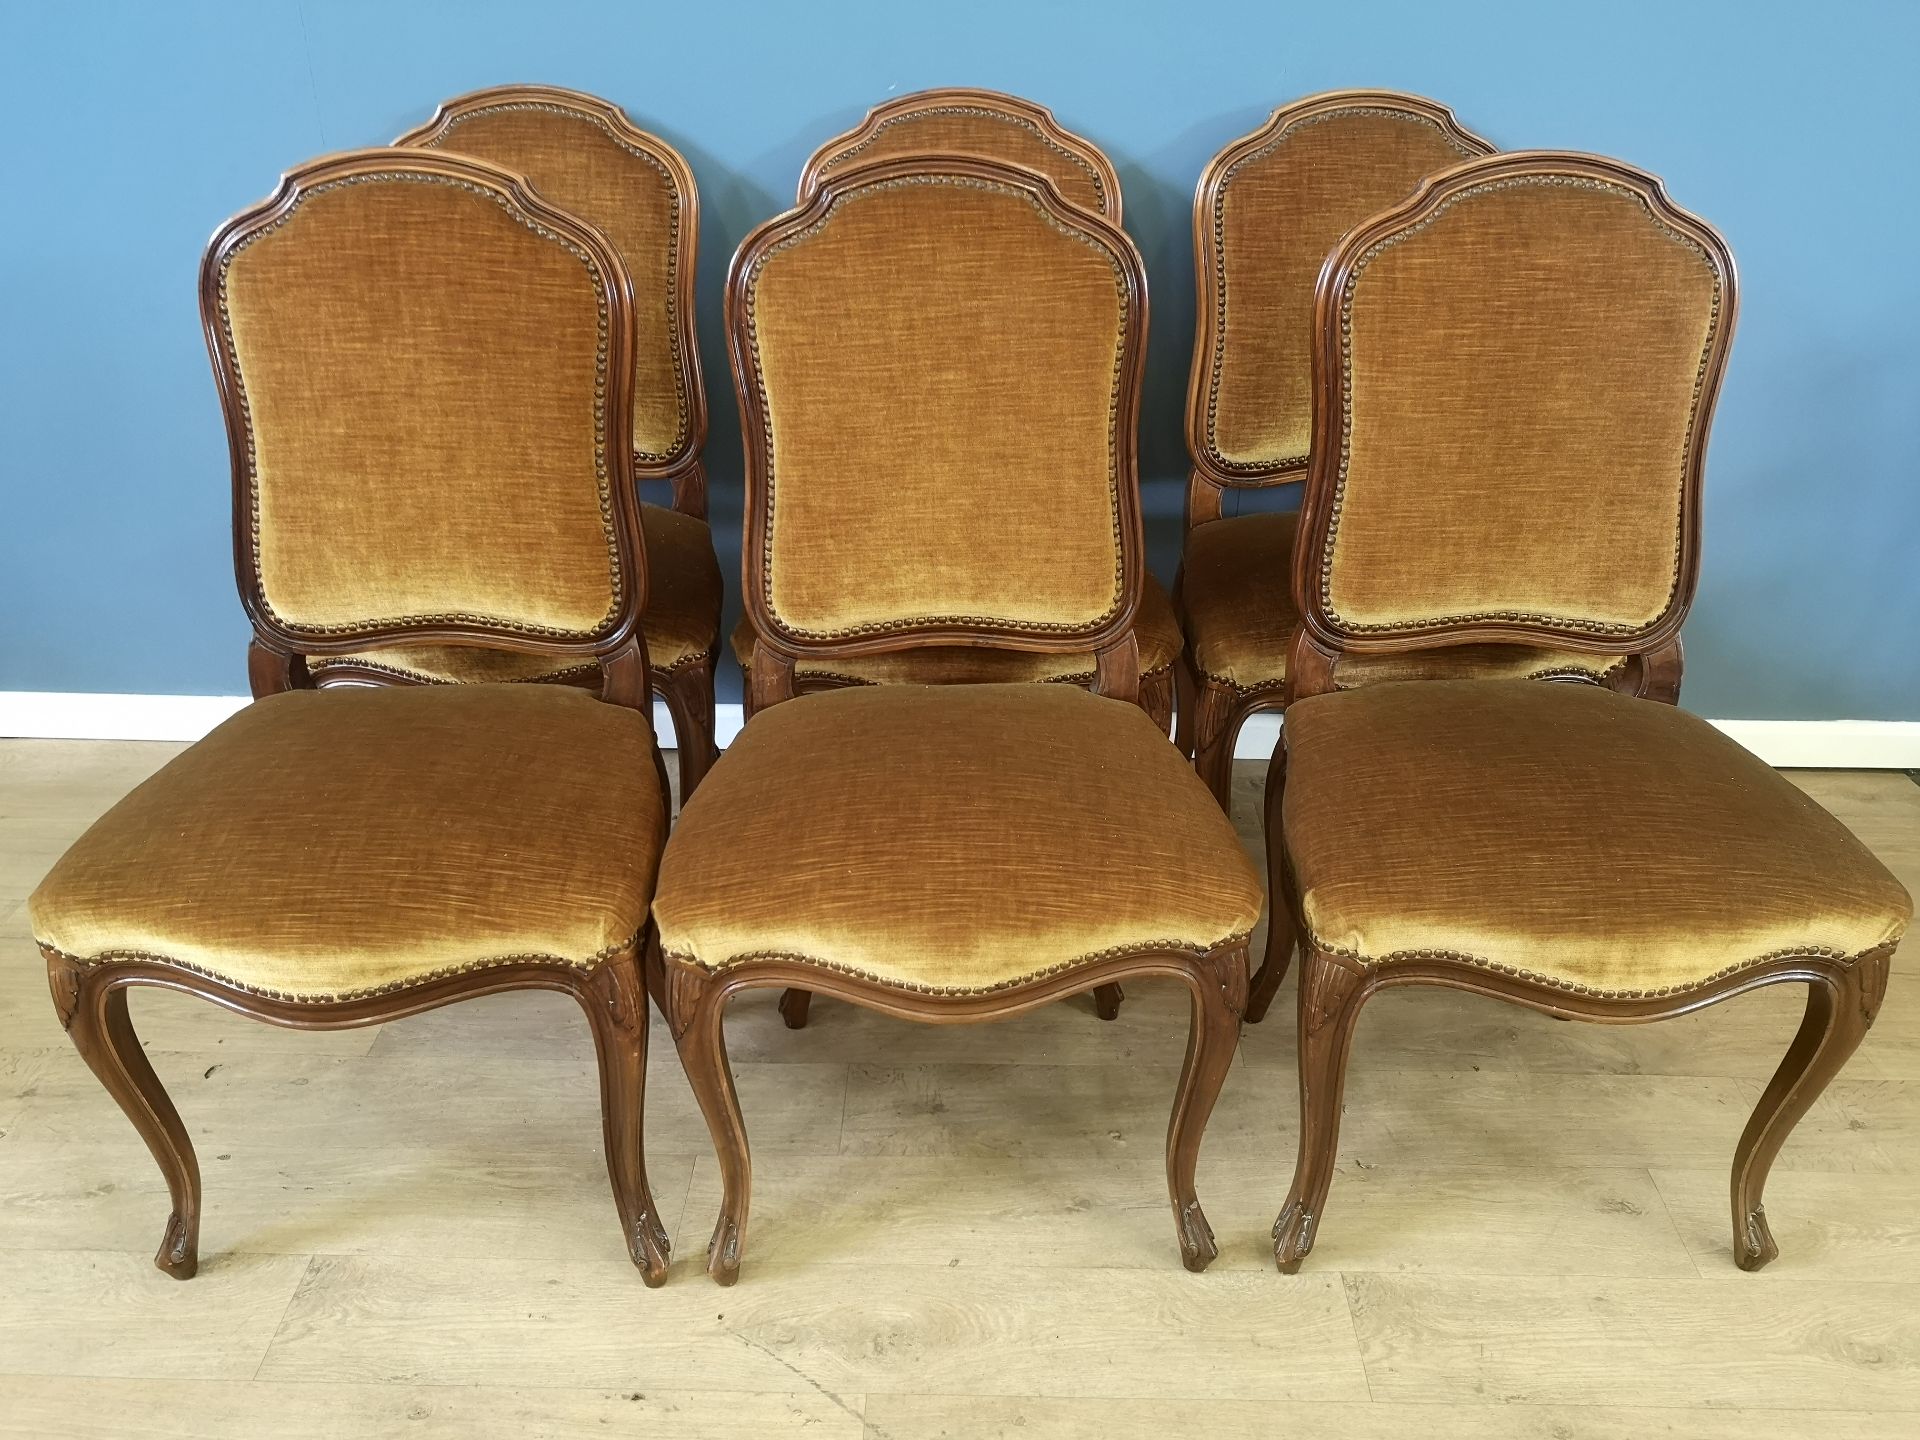 Six upholstered dining chairs